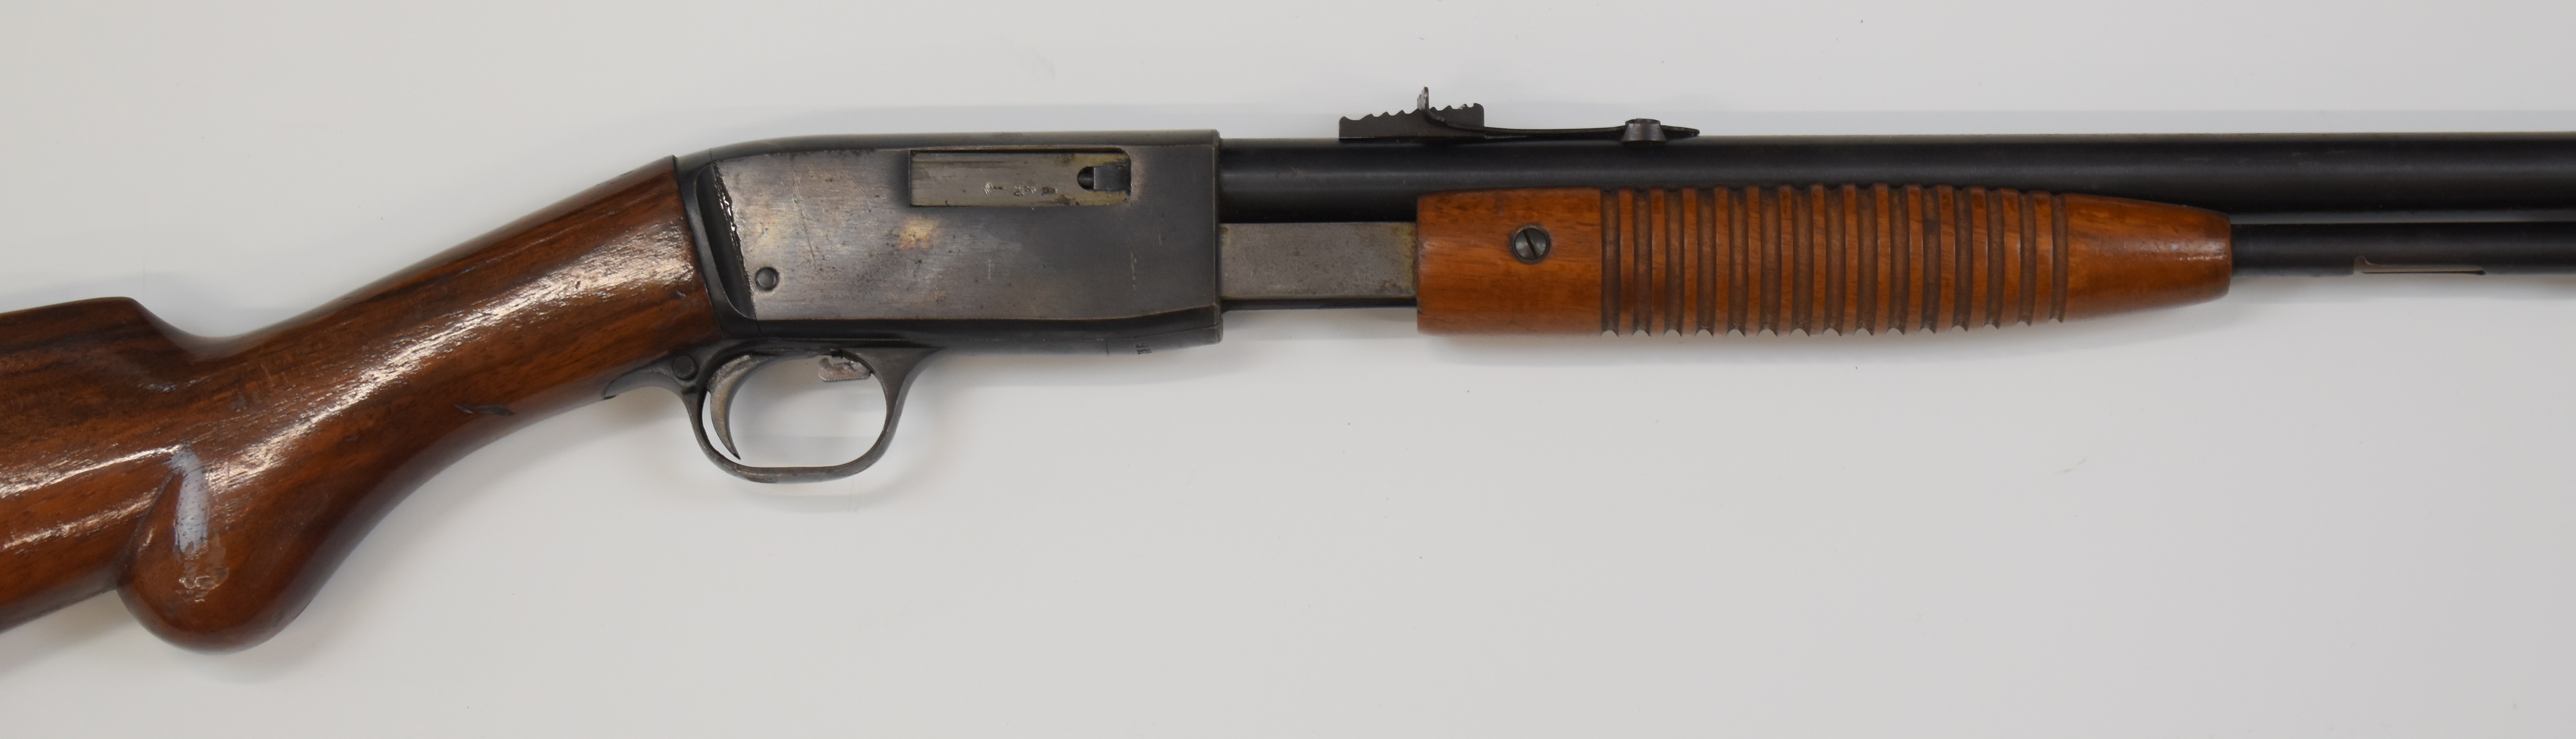 Browning .22 pump-action rifle with semi-pistol grip, adjustable sights and 21.5 inch barrel, - Image 4 of 9